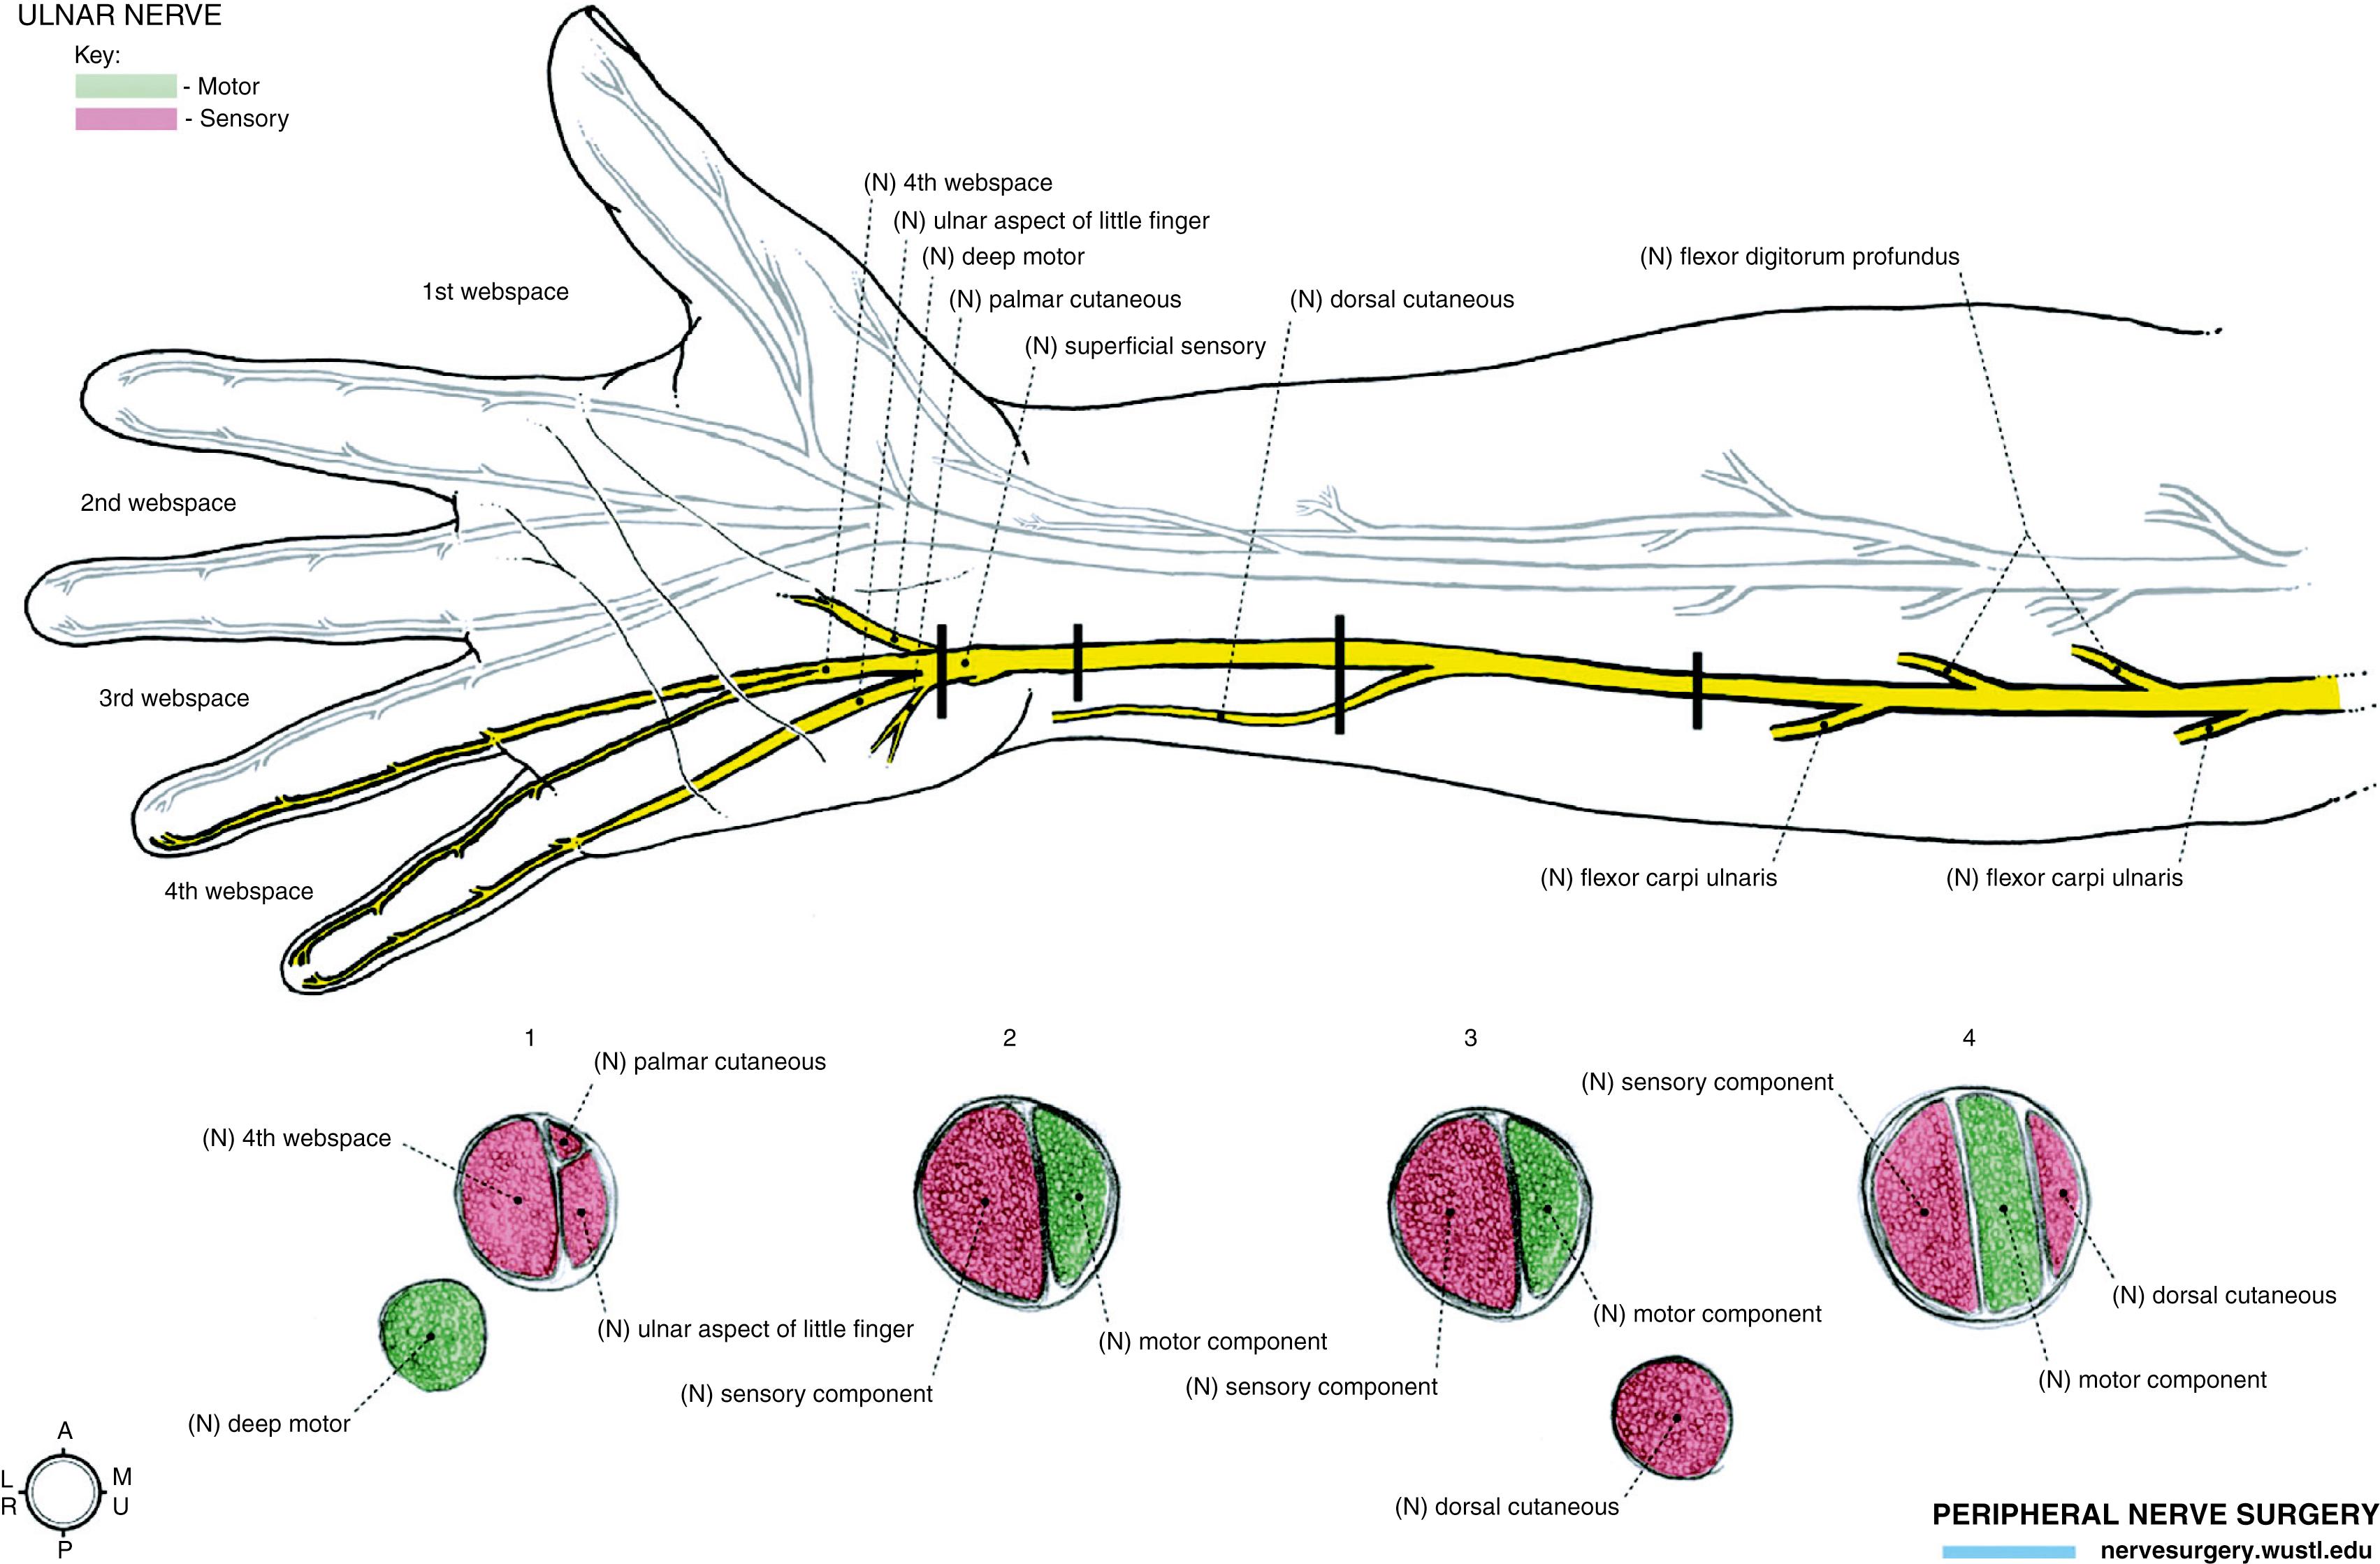 Fig. 53.2, The internal topography of the ulnar nerve.